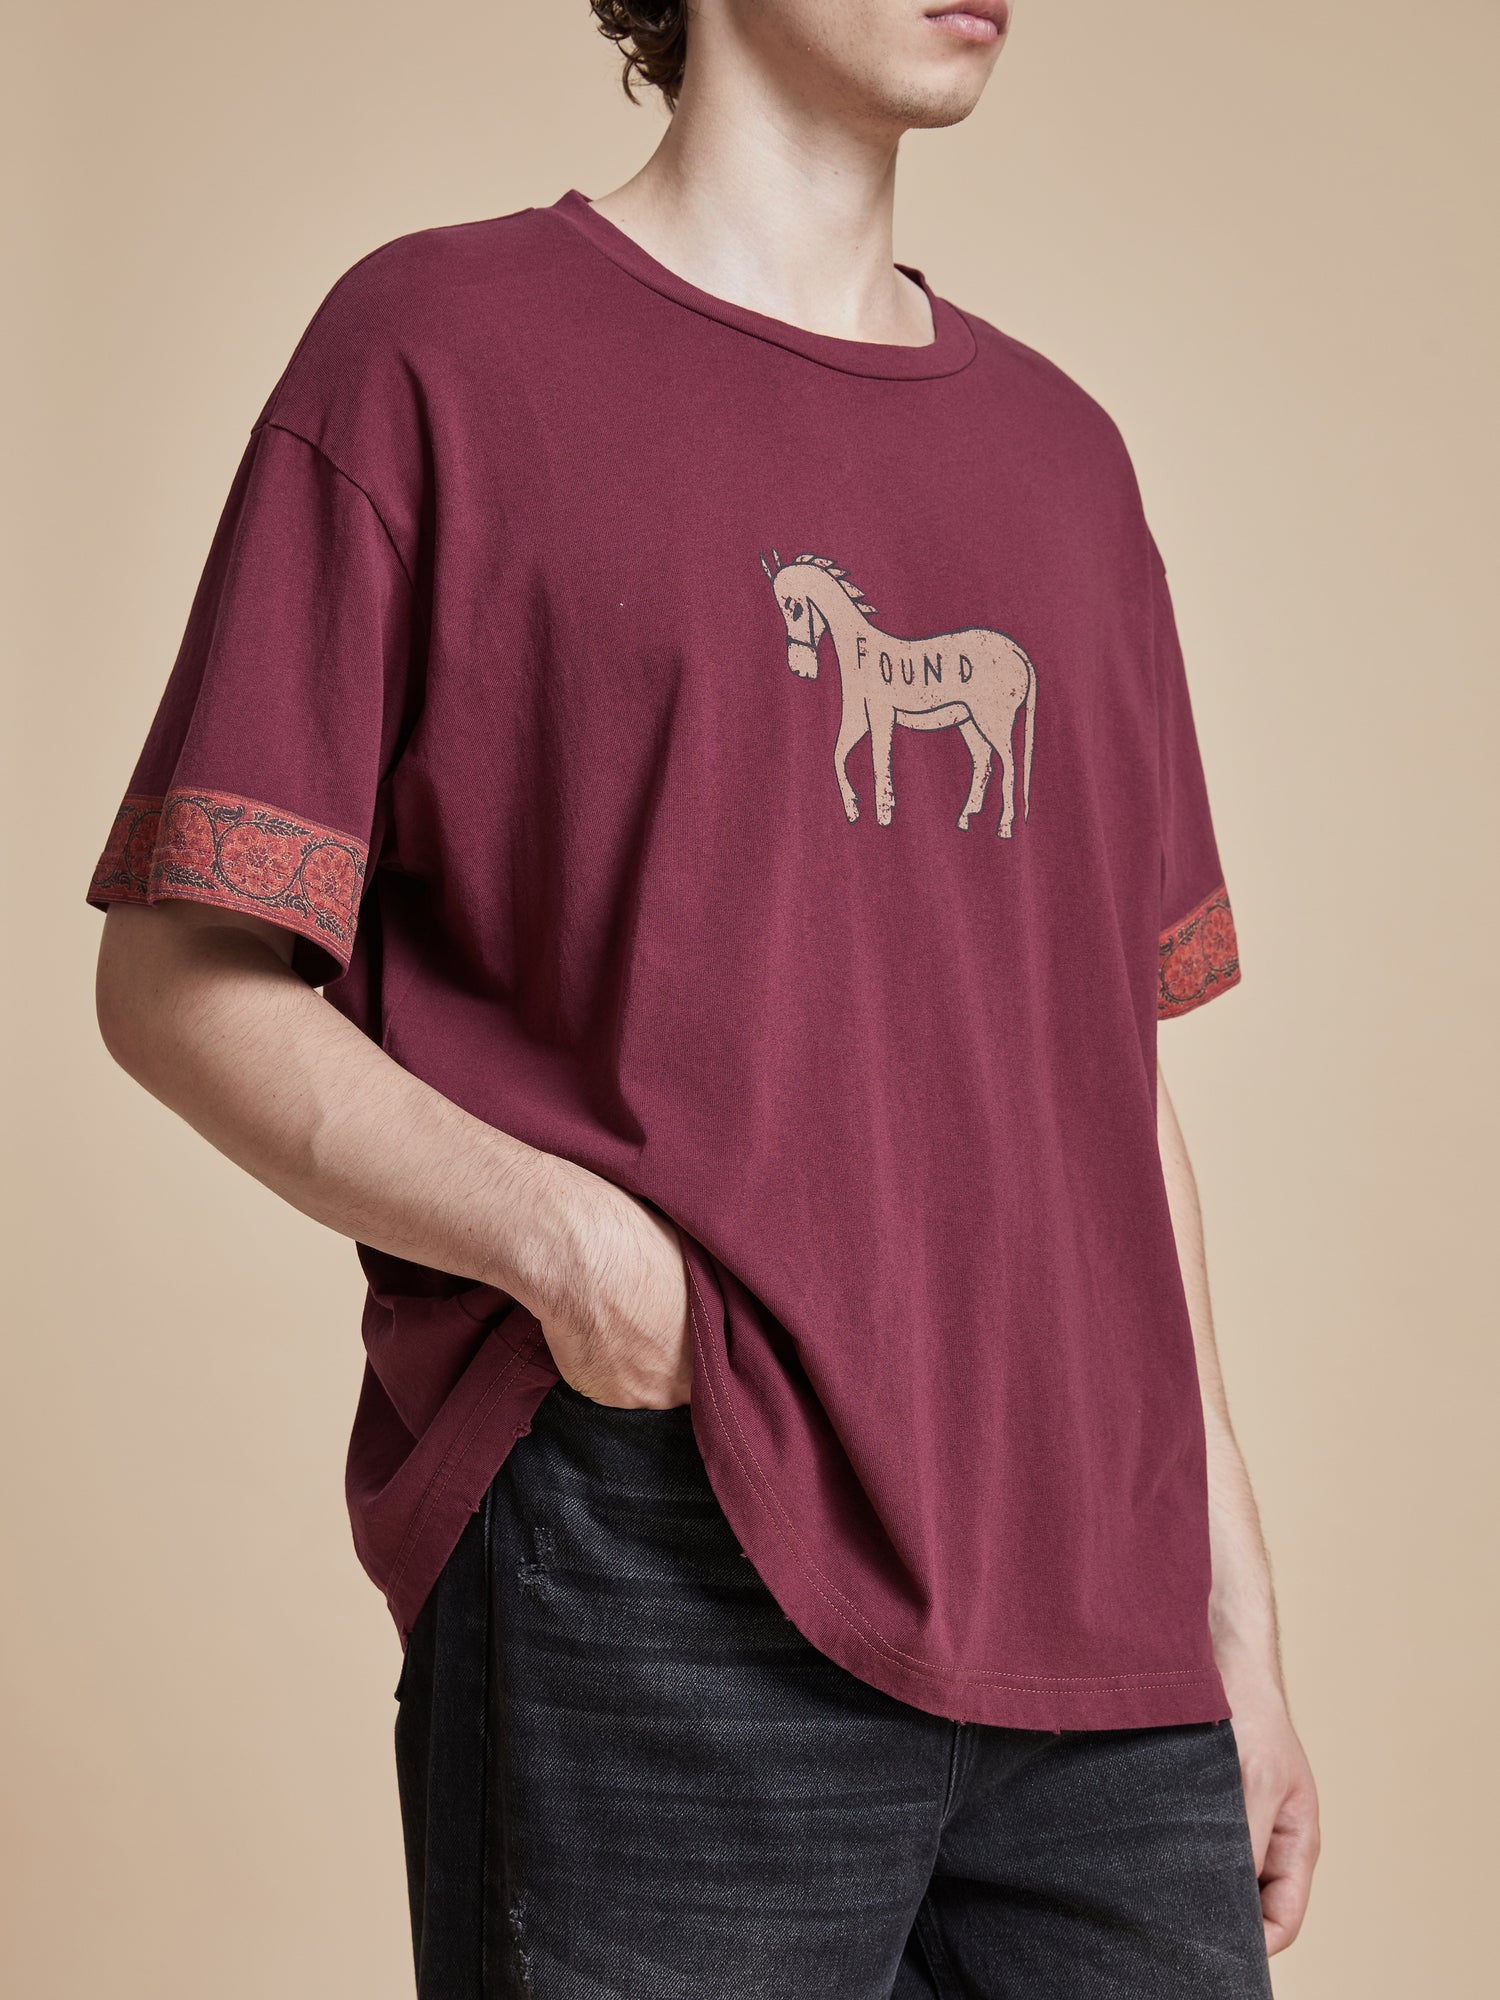 A man wearing a burgundy Horse Embellishment Tee from Found.